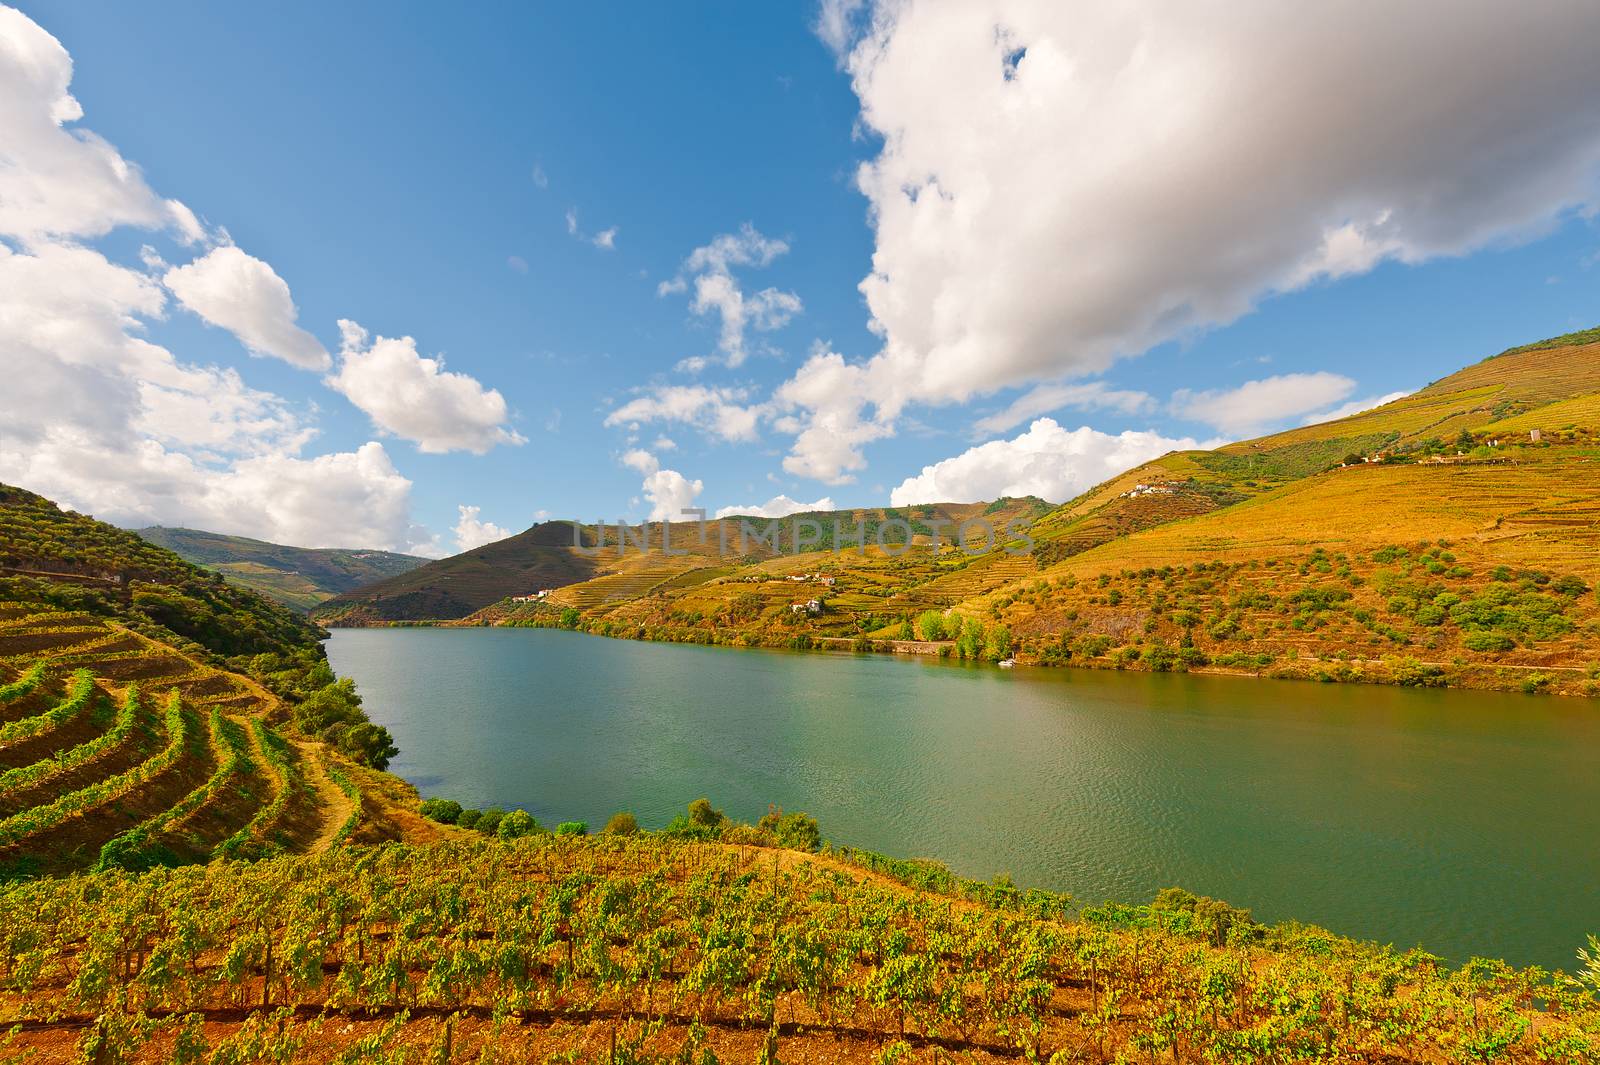 River Douro by gkuna